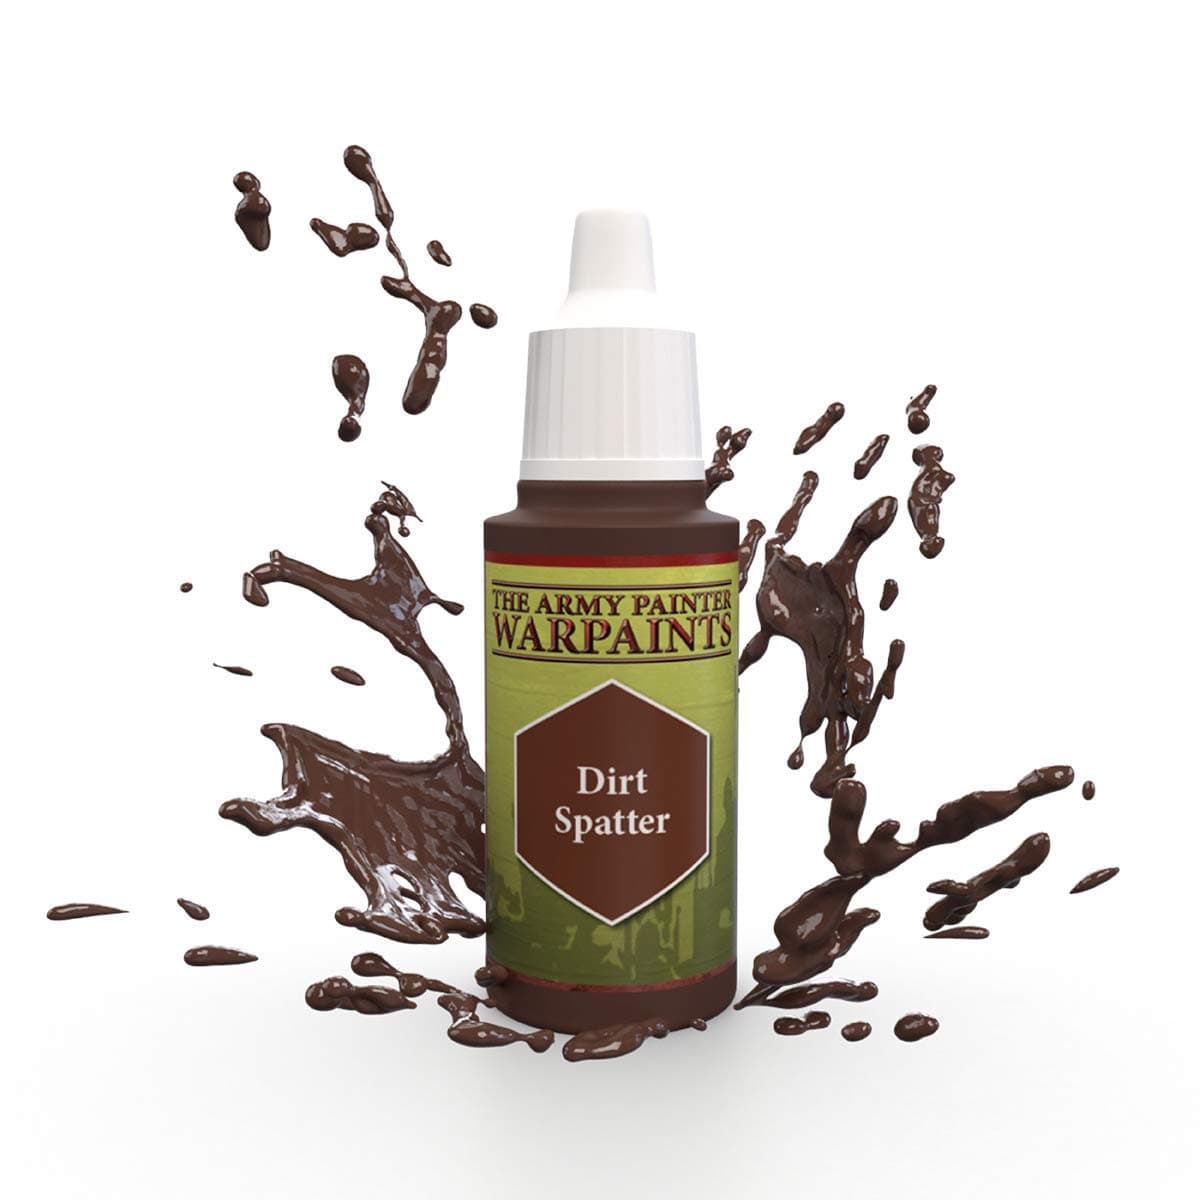 The Army Painter Accessories The Army Painter Warpaints: Dirt Spatter 18ml